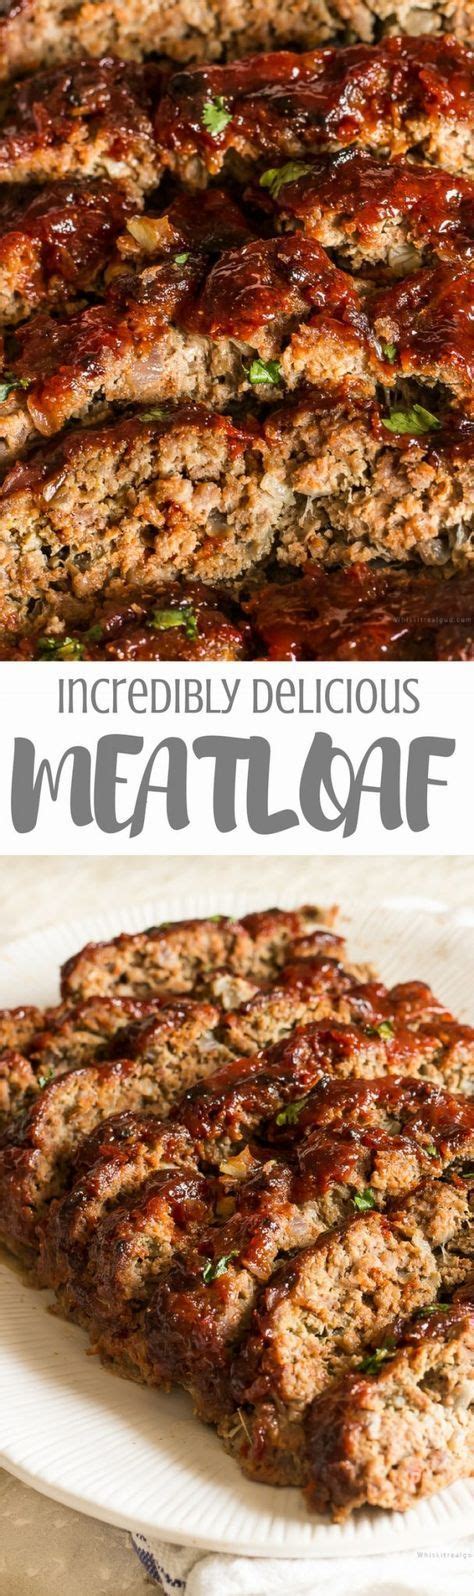 Most side dishes work, but of course, some are better than others. The Best Meatloaf | Recipe | Good meatloaf recipe, Best meatloaf, Food recipes